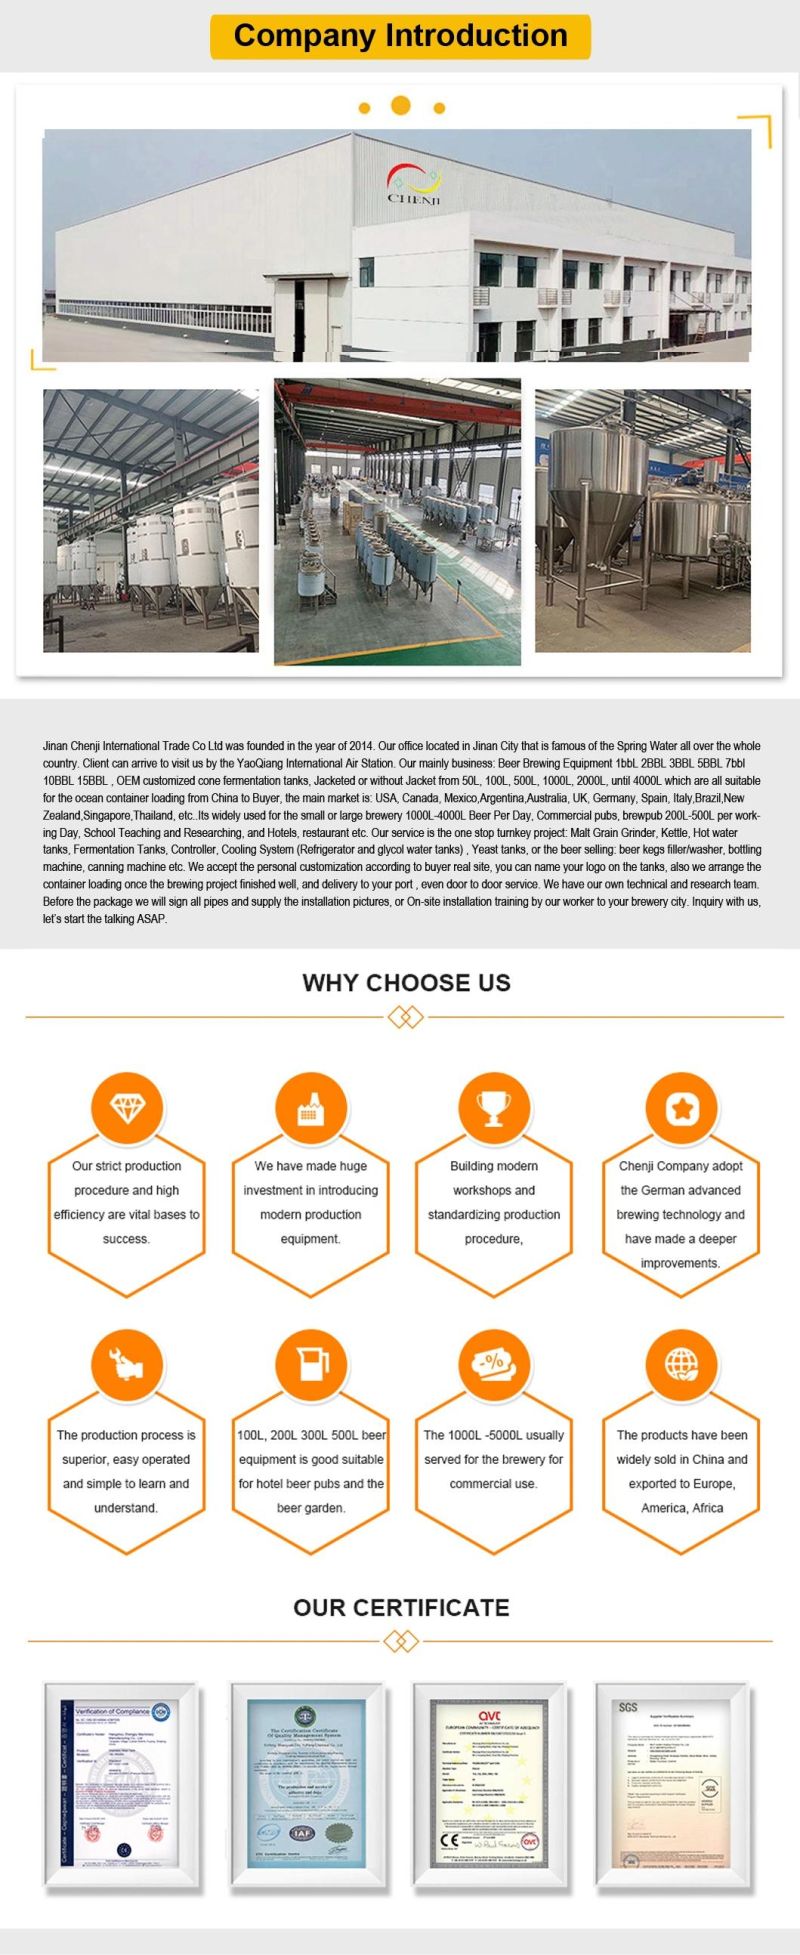 20bbl 25bbl 30bbl Commercial Brewery Brewhouse Industrial Beer Production Line Price